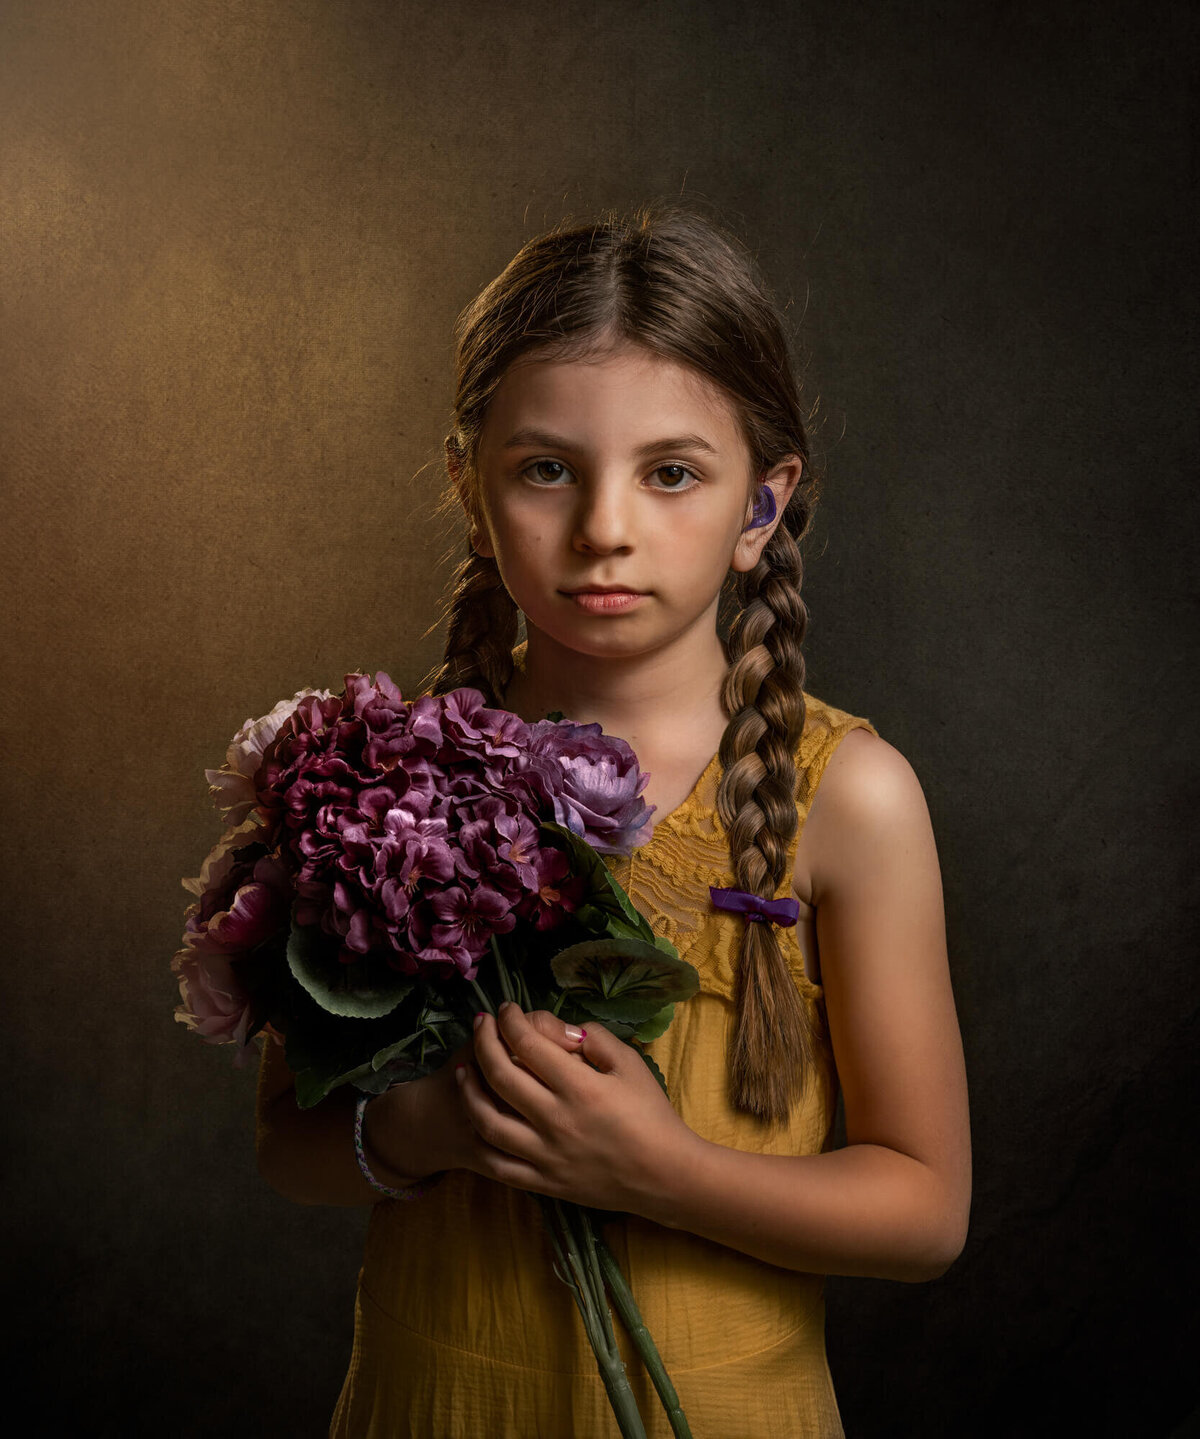 A little girl in a yellow dress with braids in her hair holding purple flowers